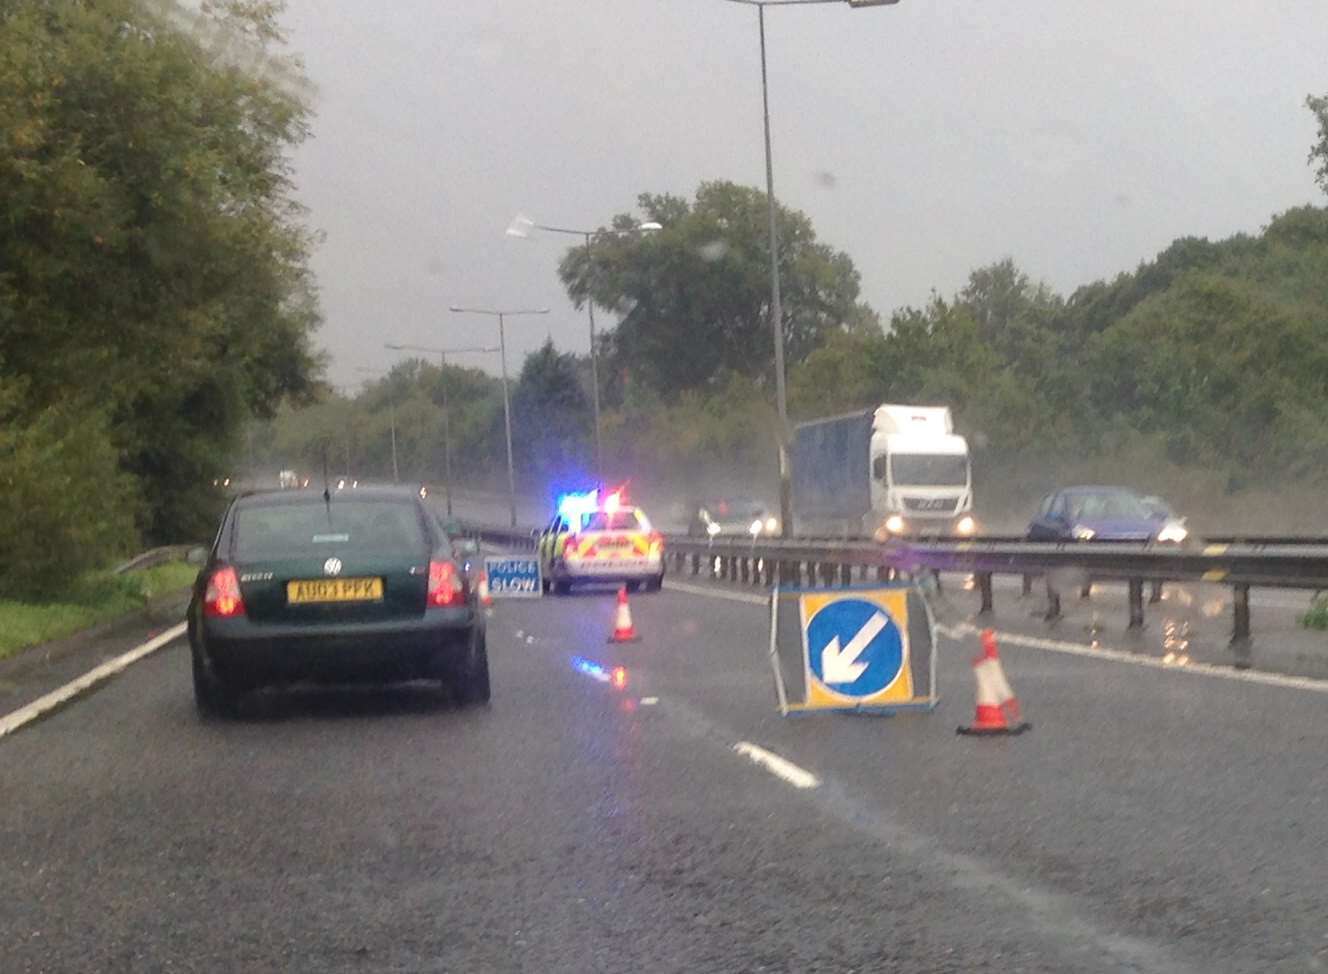 Police slow down traffic on the Thanet Way following crash